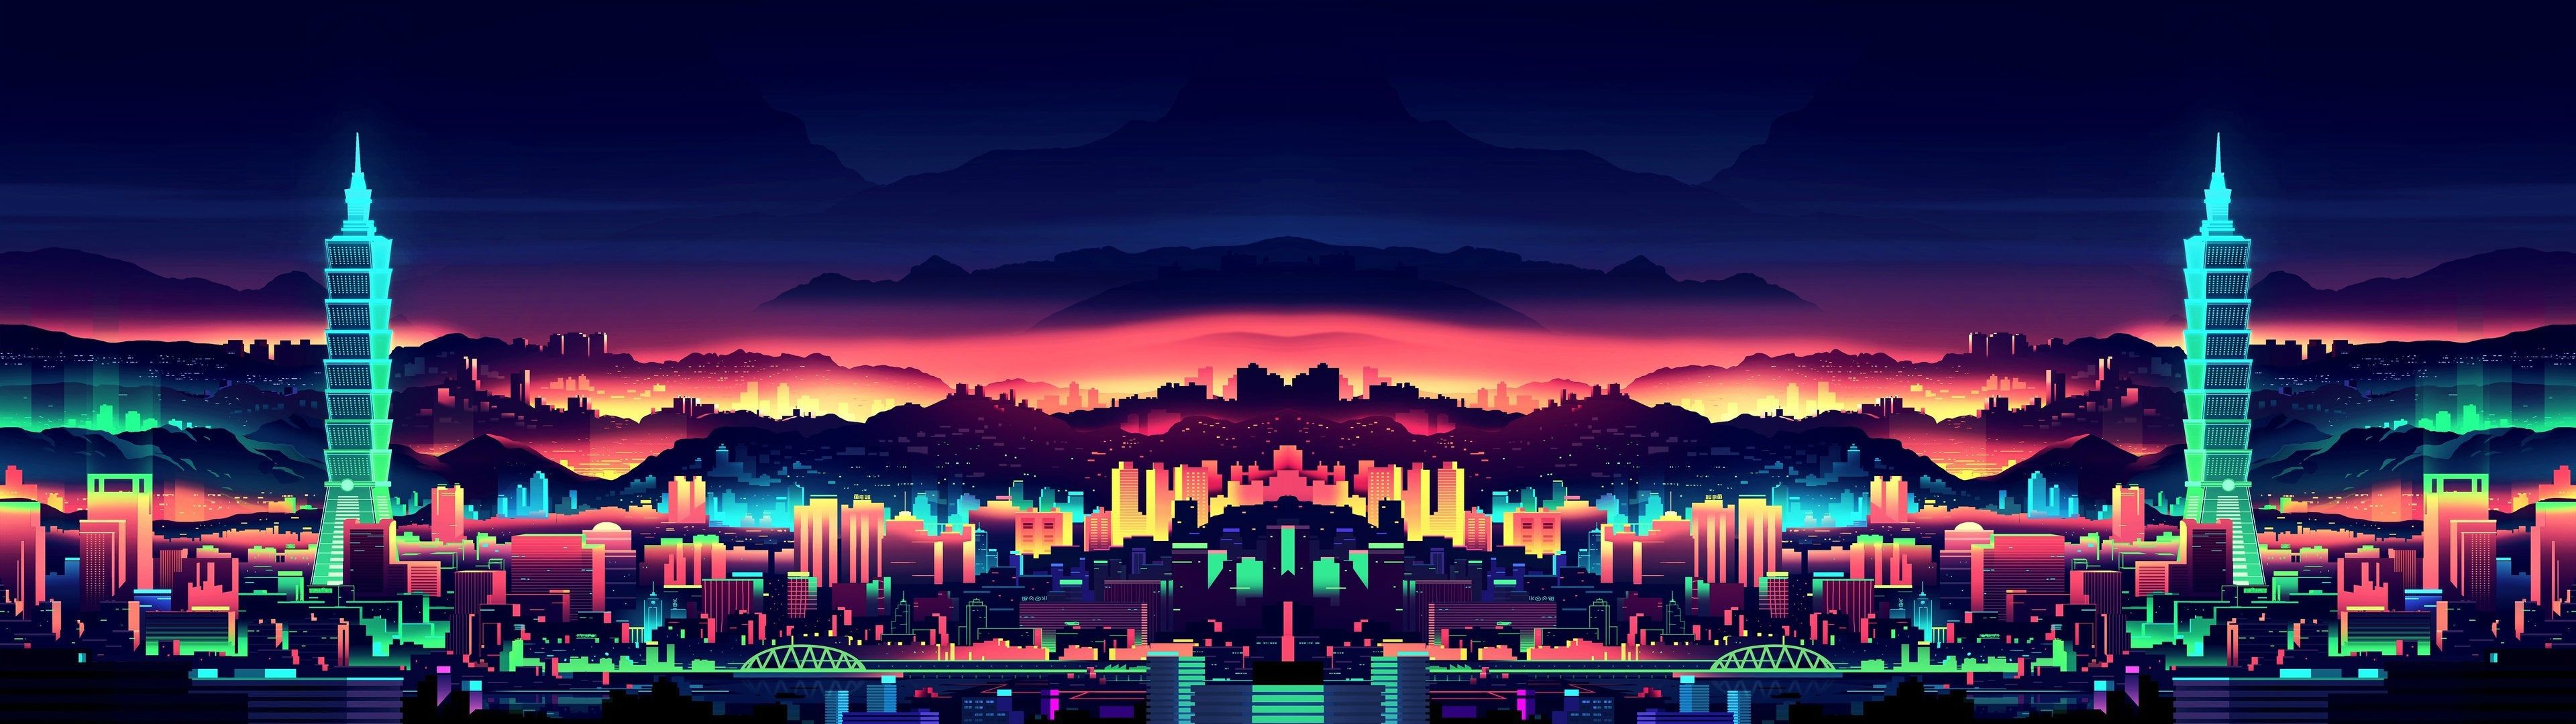 Neon city 3840x1080 wallpaper (1920x1080 versions included)